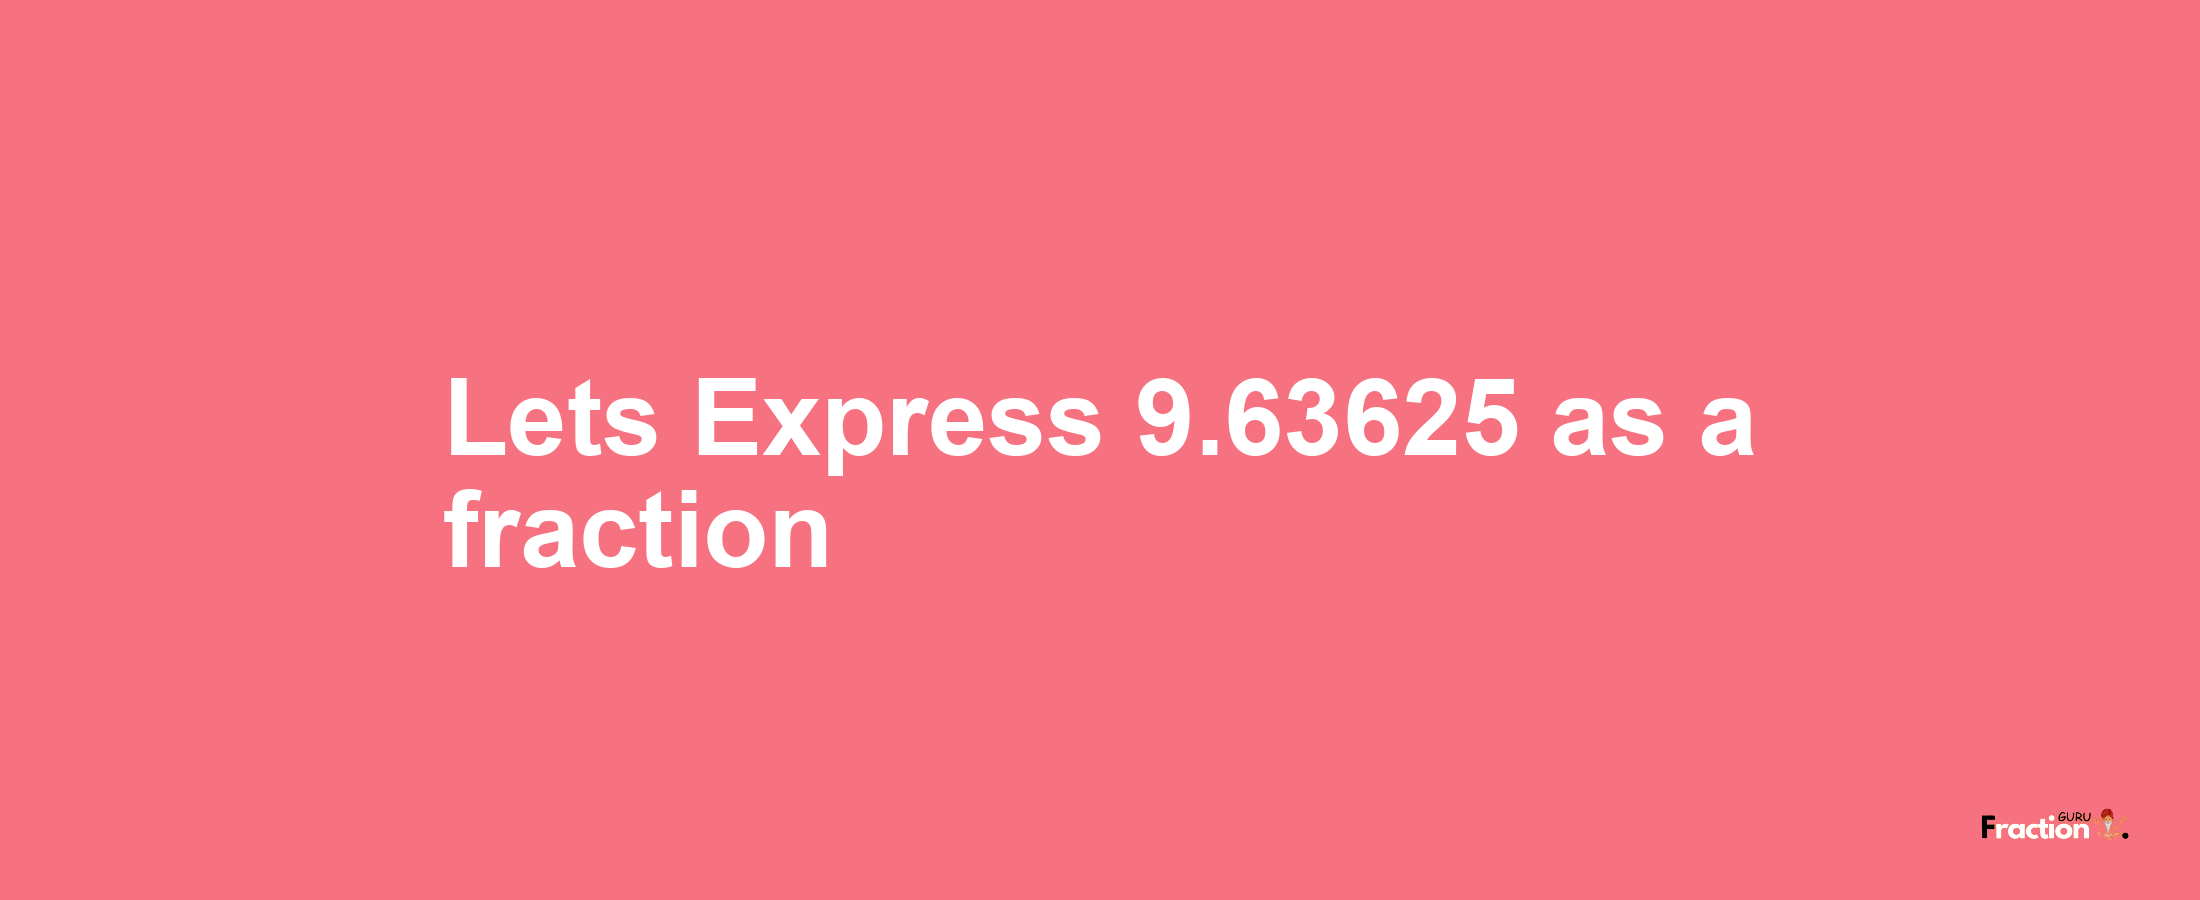 Lets Express 9.63625 as afraction